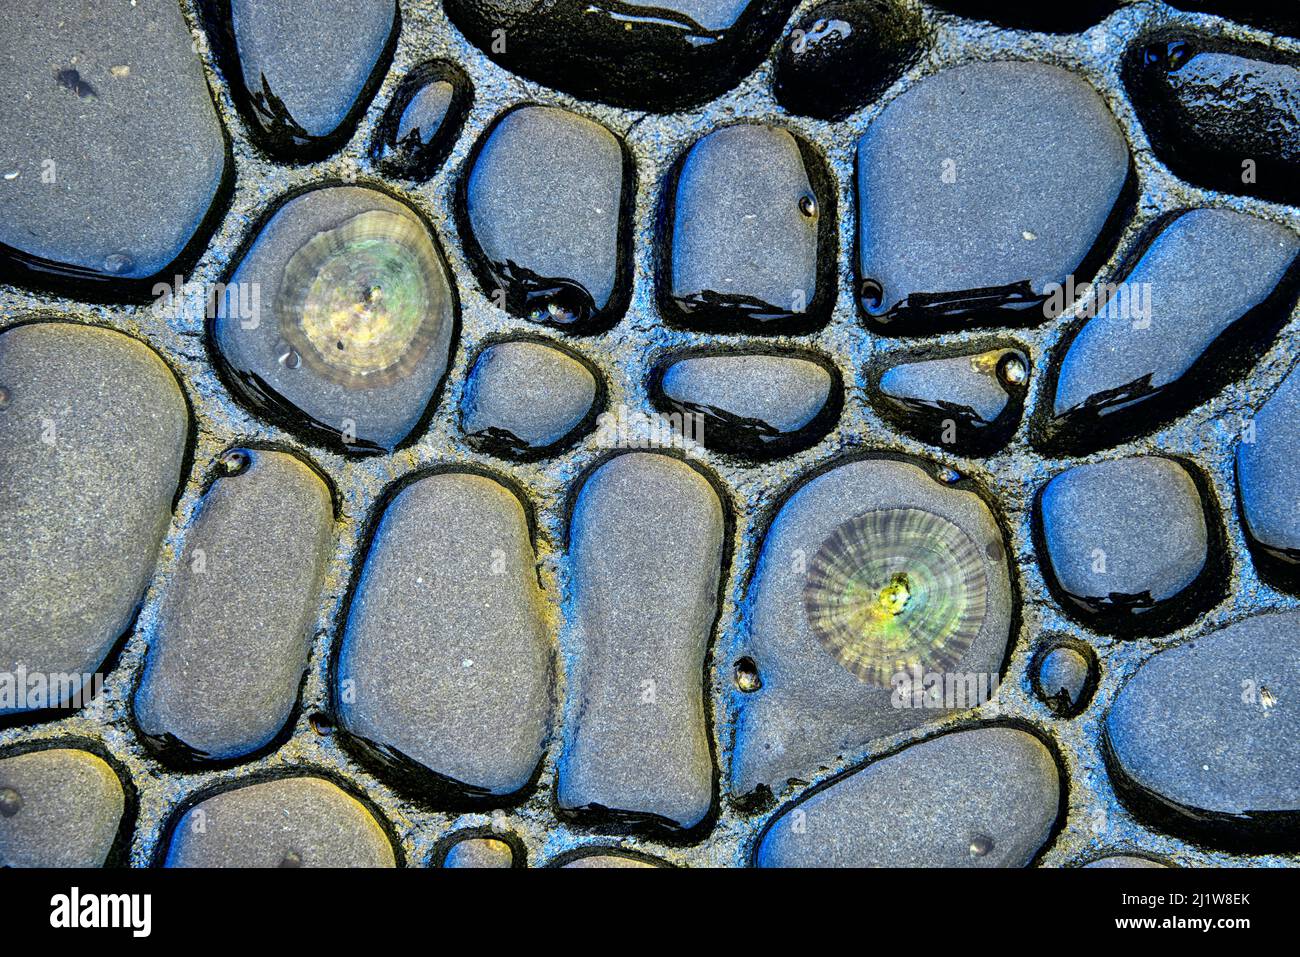 From above abstract background of stones of different shapes and sizes on wet ground on rainy day Stock Photo